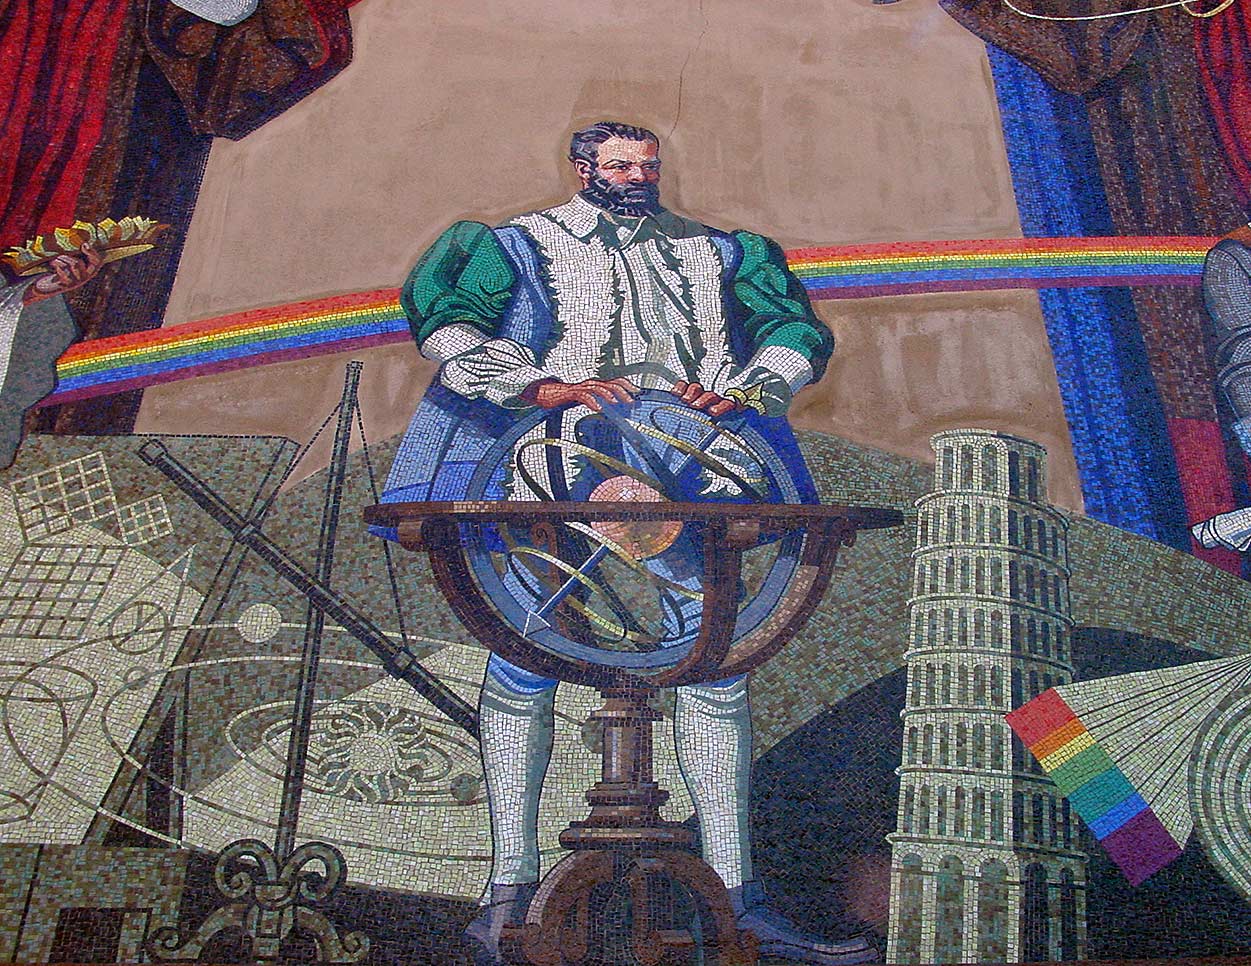 Galileo and an armillary sphere, with a planetry system and the leaning tower of Pisa.